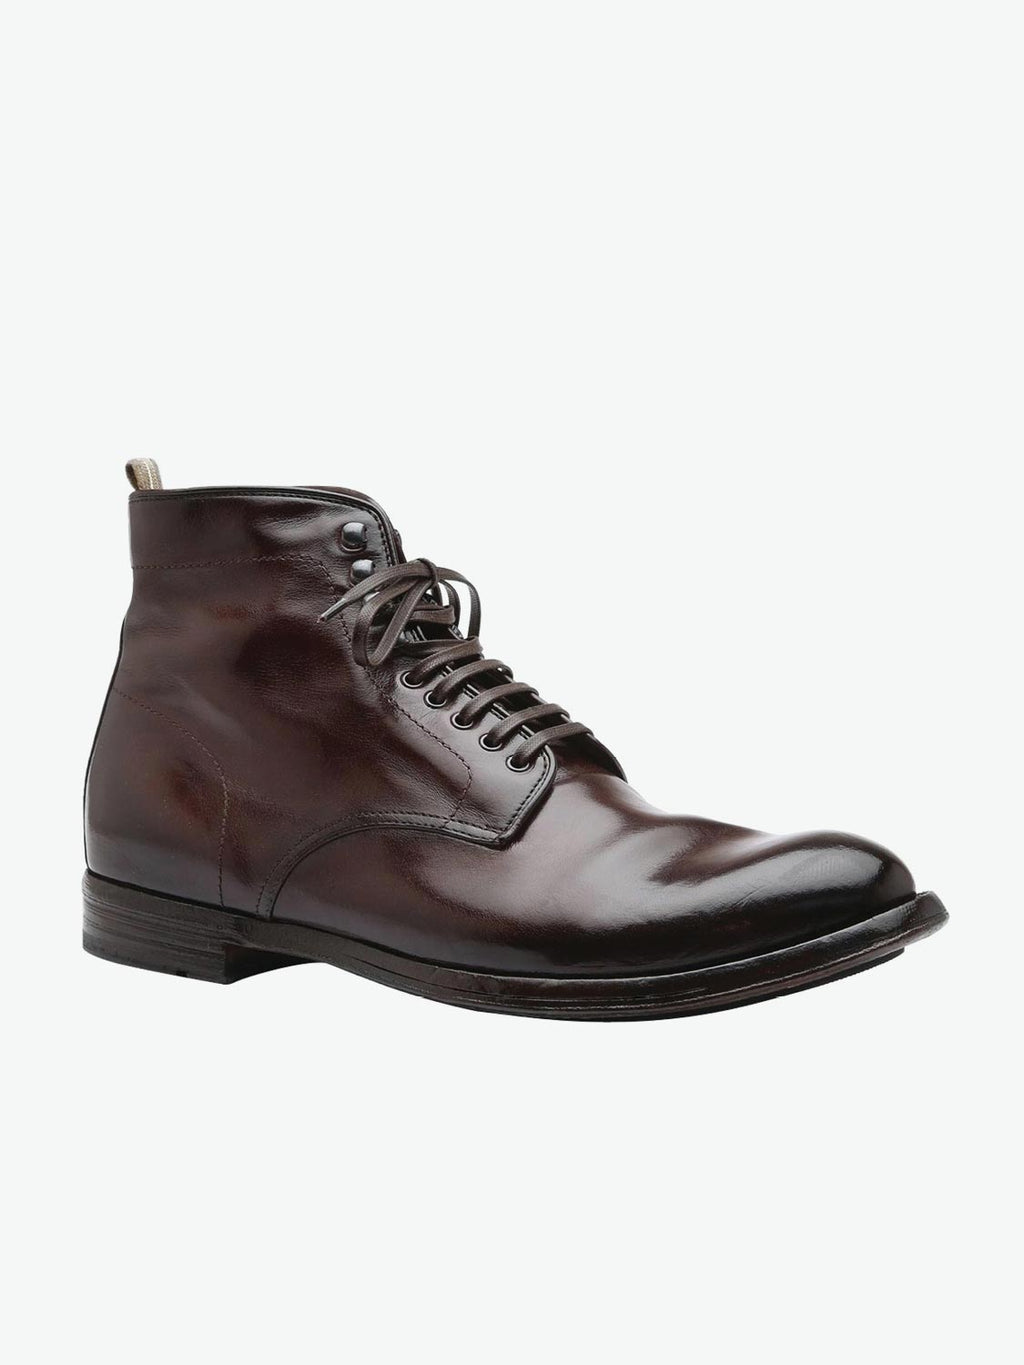 Officine Creative Anatomia 13 Dark Brown Leather Ankle Boots